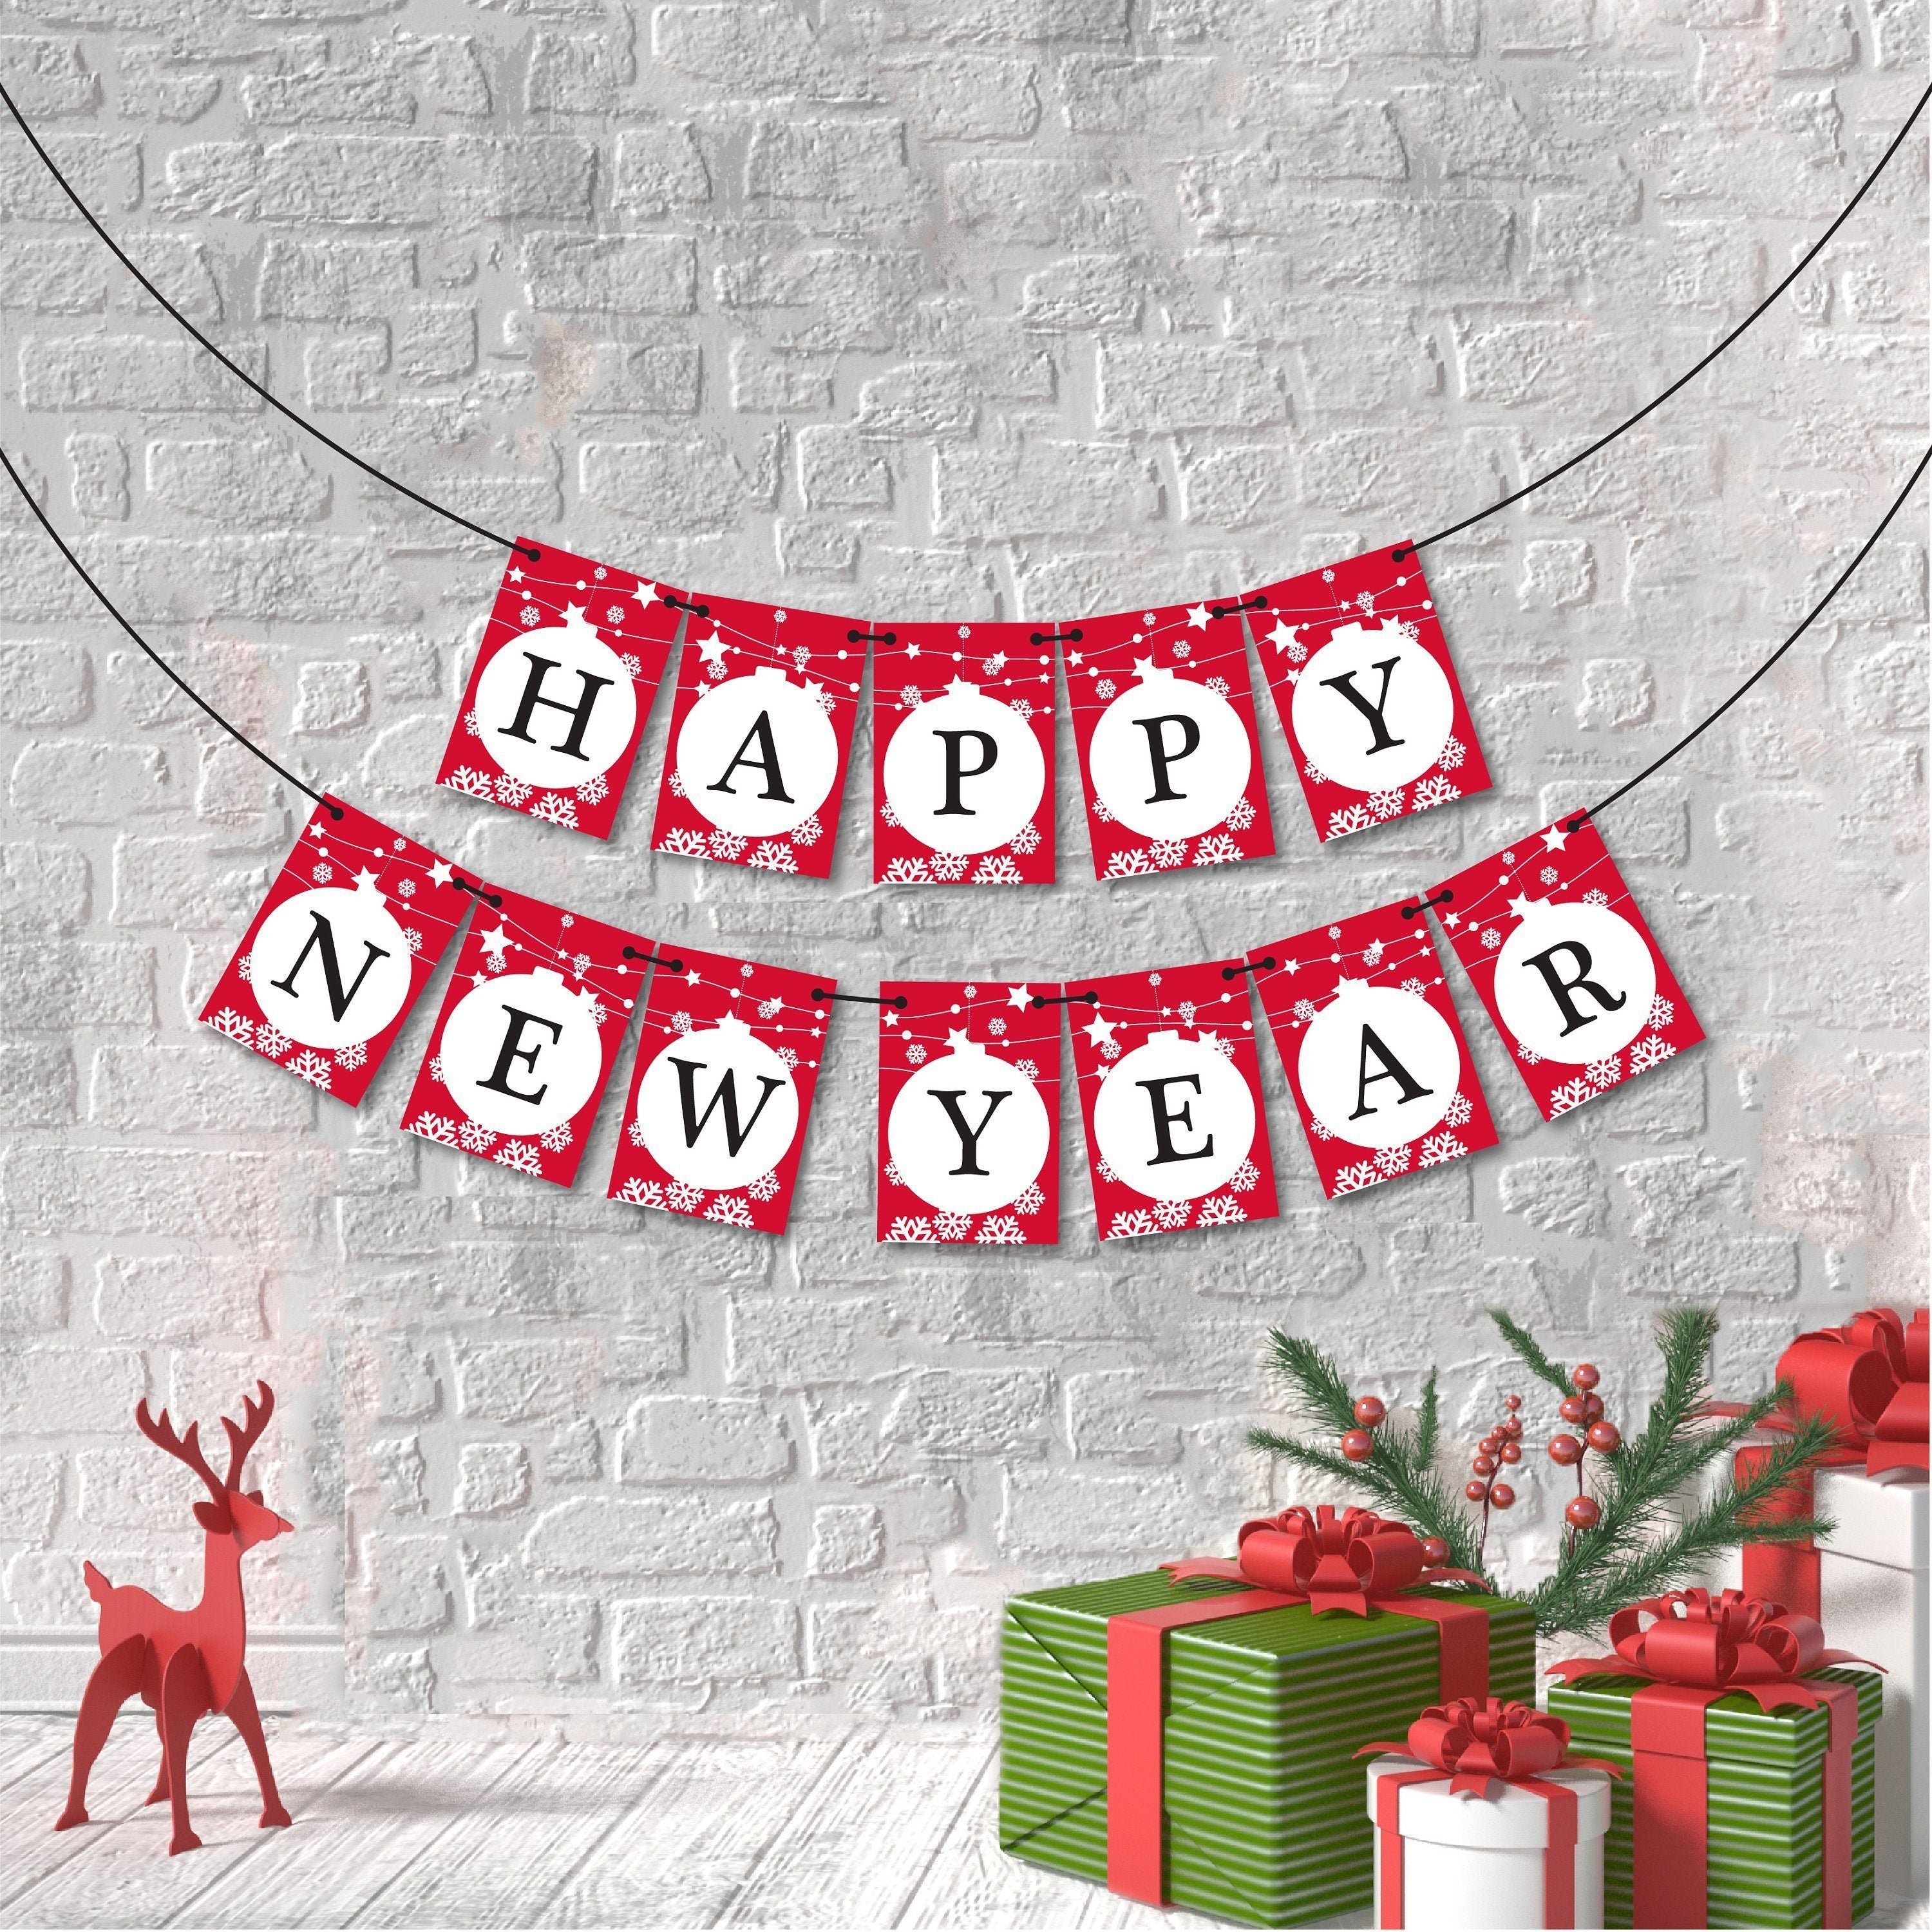 Happy New Year Banner. Christmas Bunting.